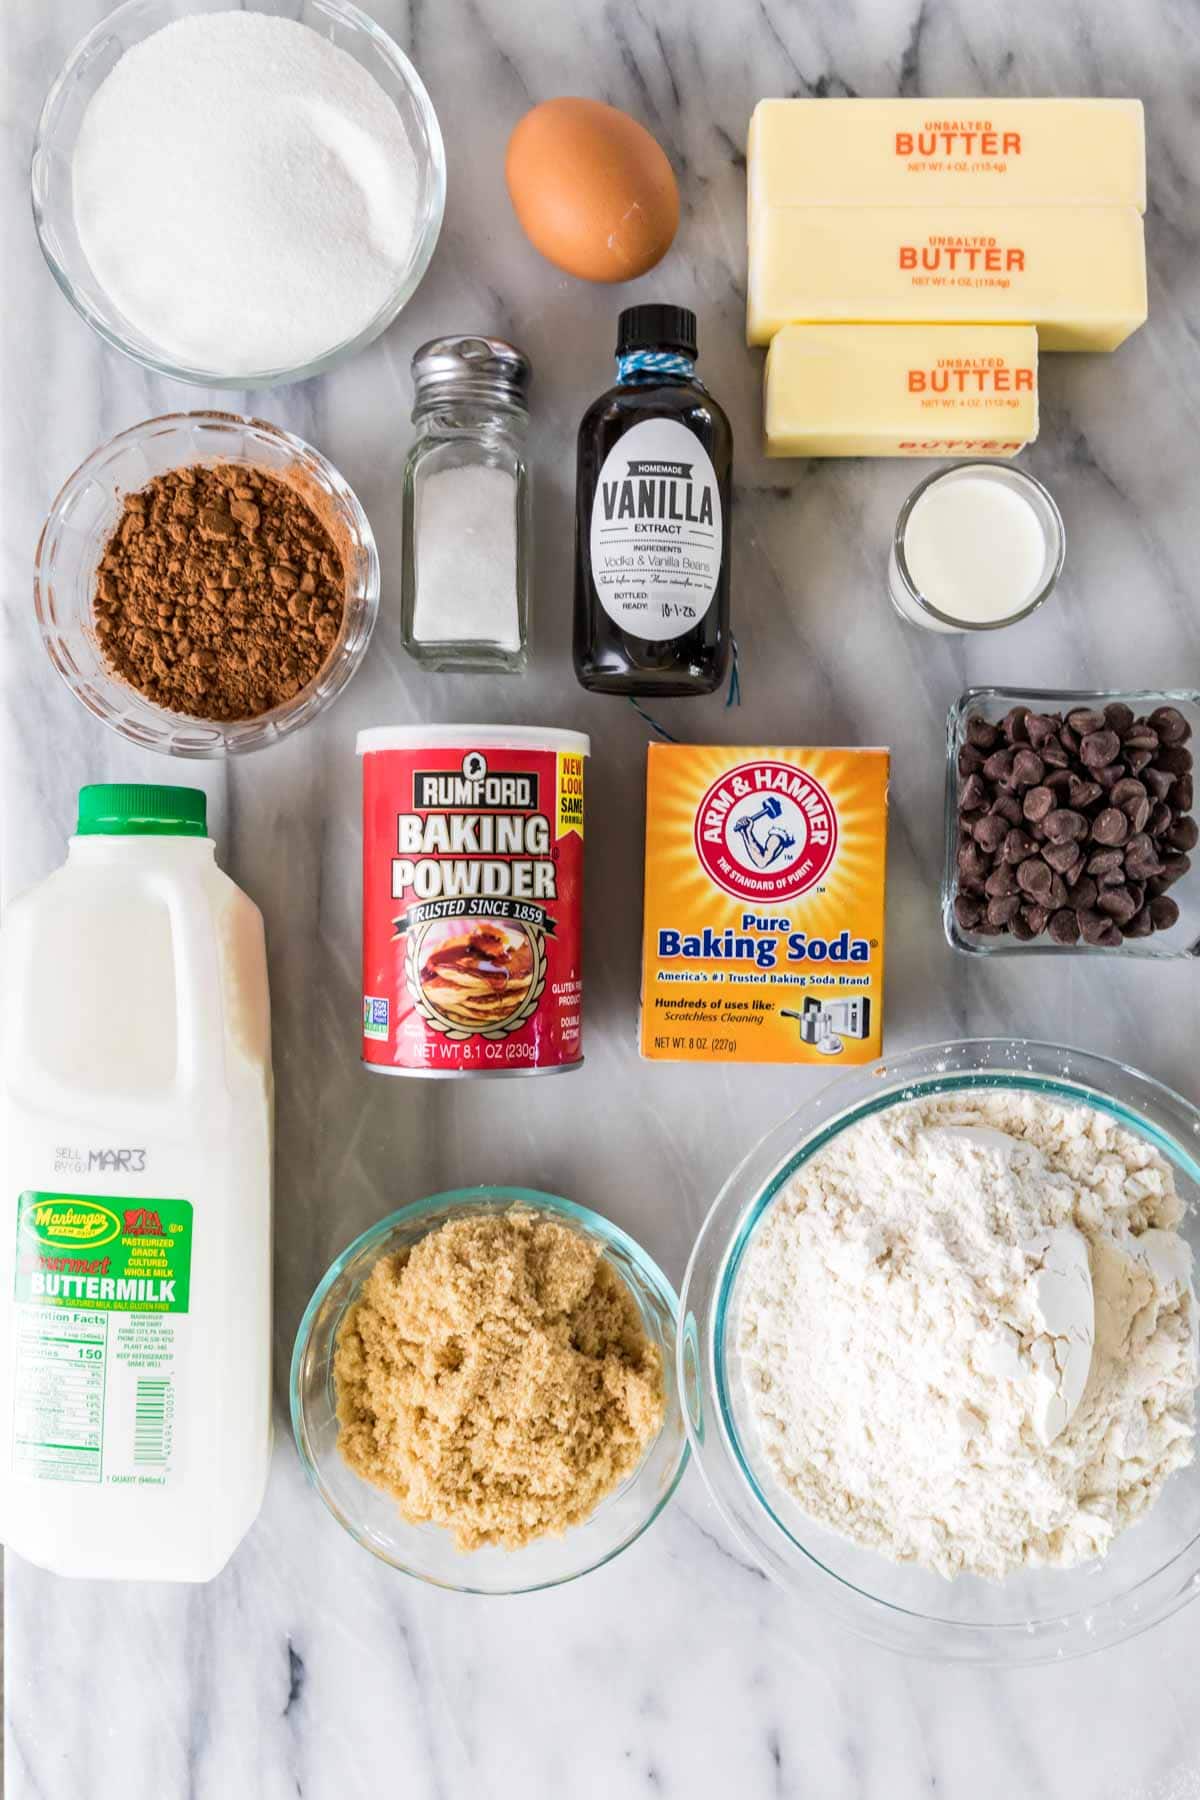 Overhead view of ingredients including buttermilk, cocoa powder, butter, chocolate chips, and more.